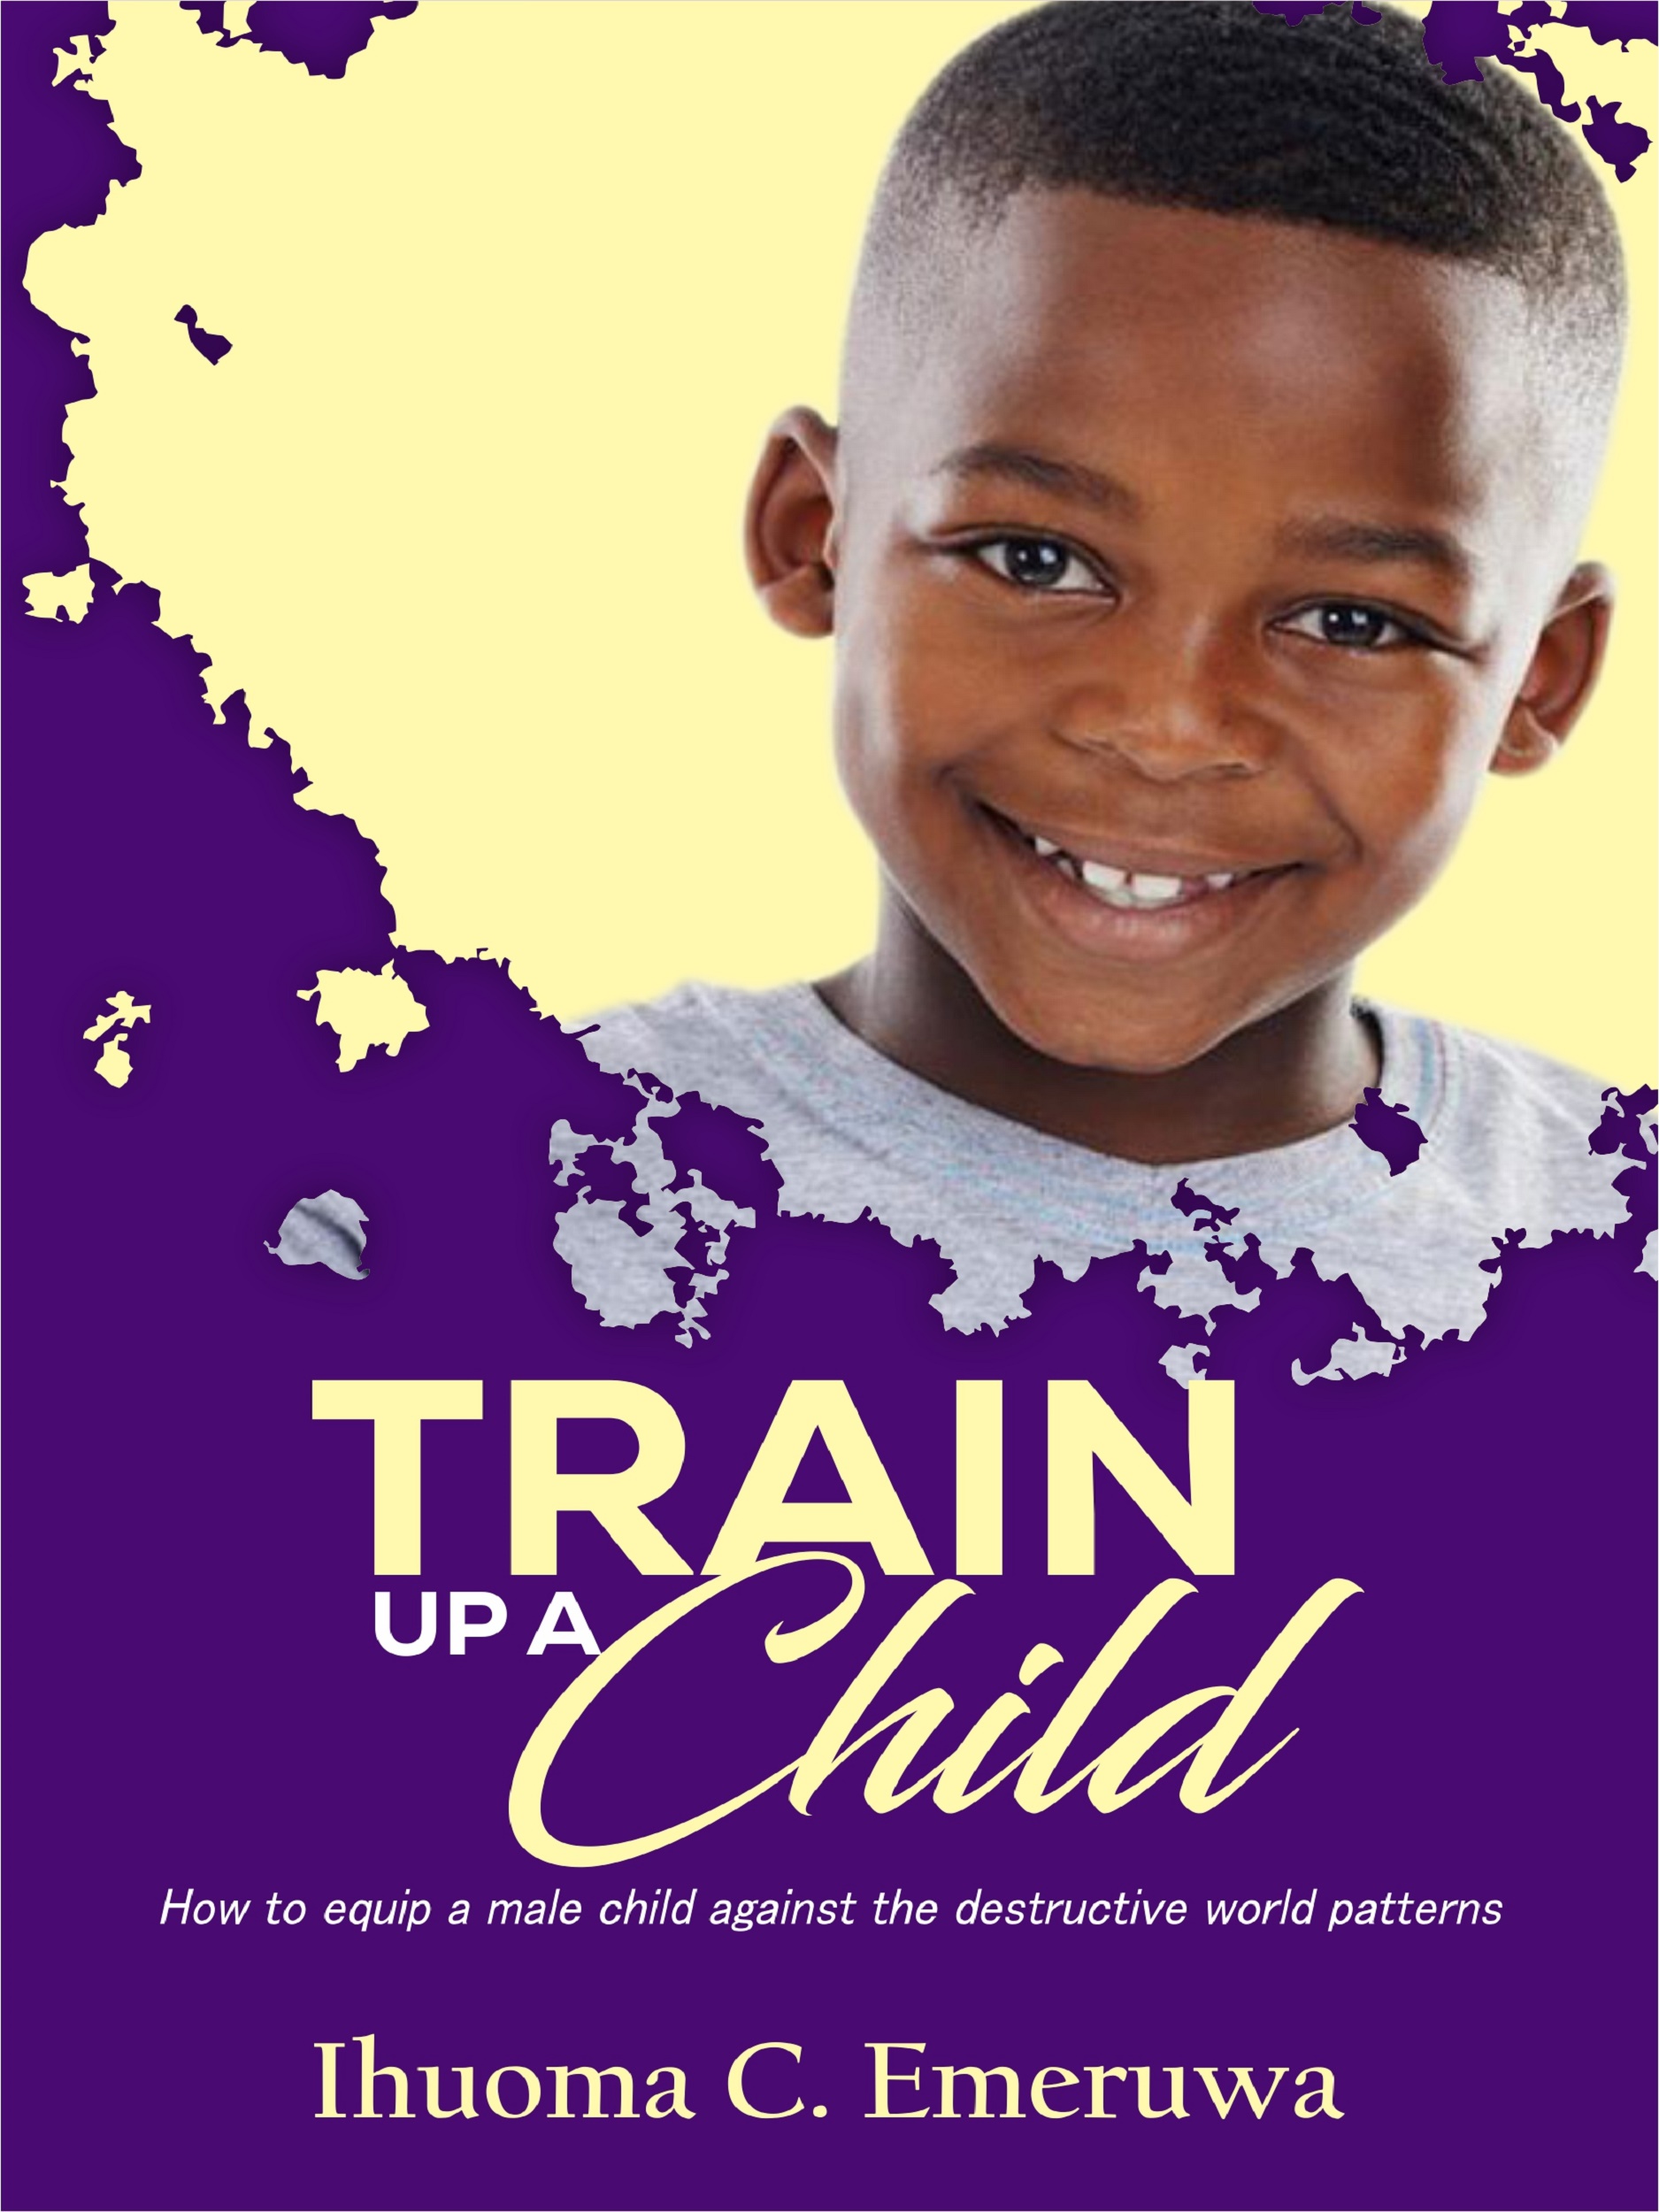 Train-up-a-Child--How-to-Equip-a-Male-Child-Against-the-Destructive-World-Patterns